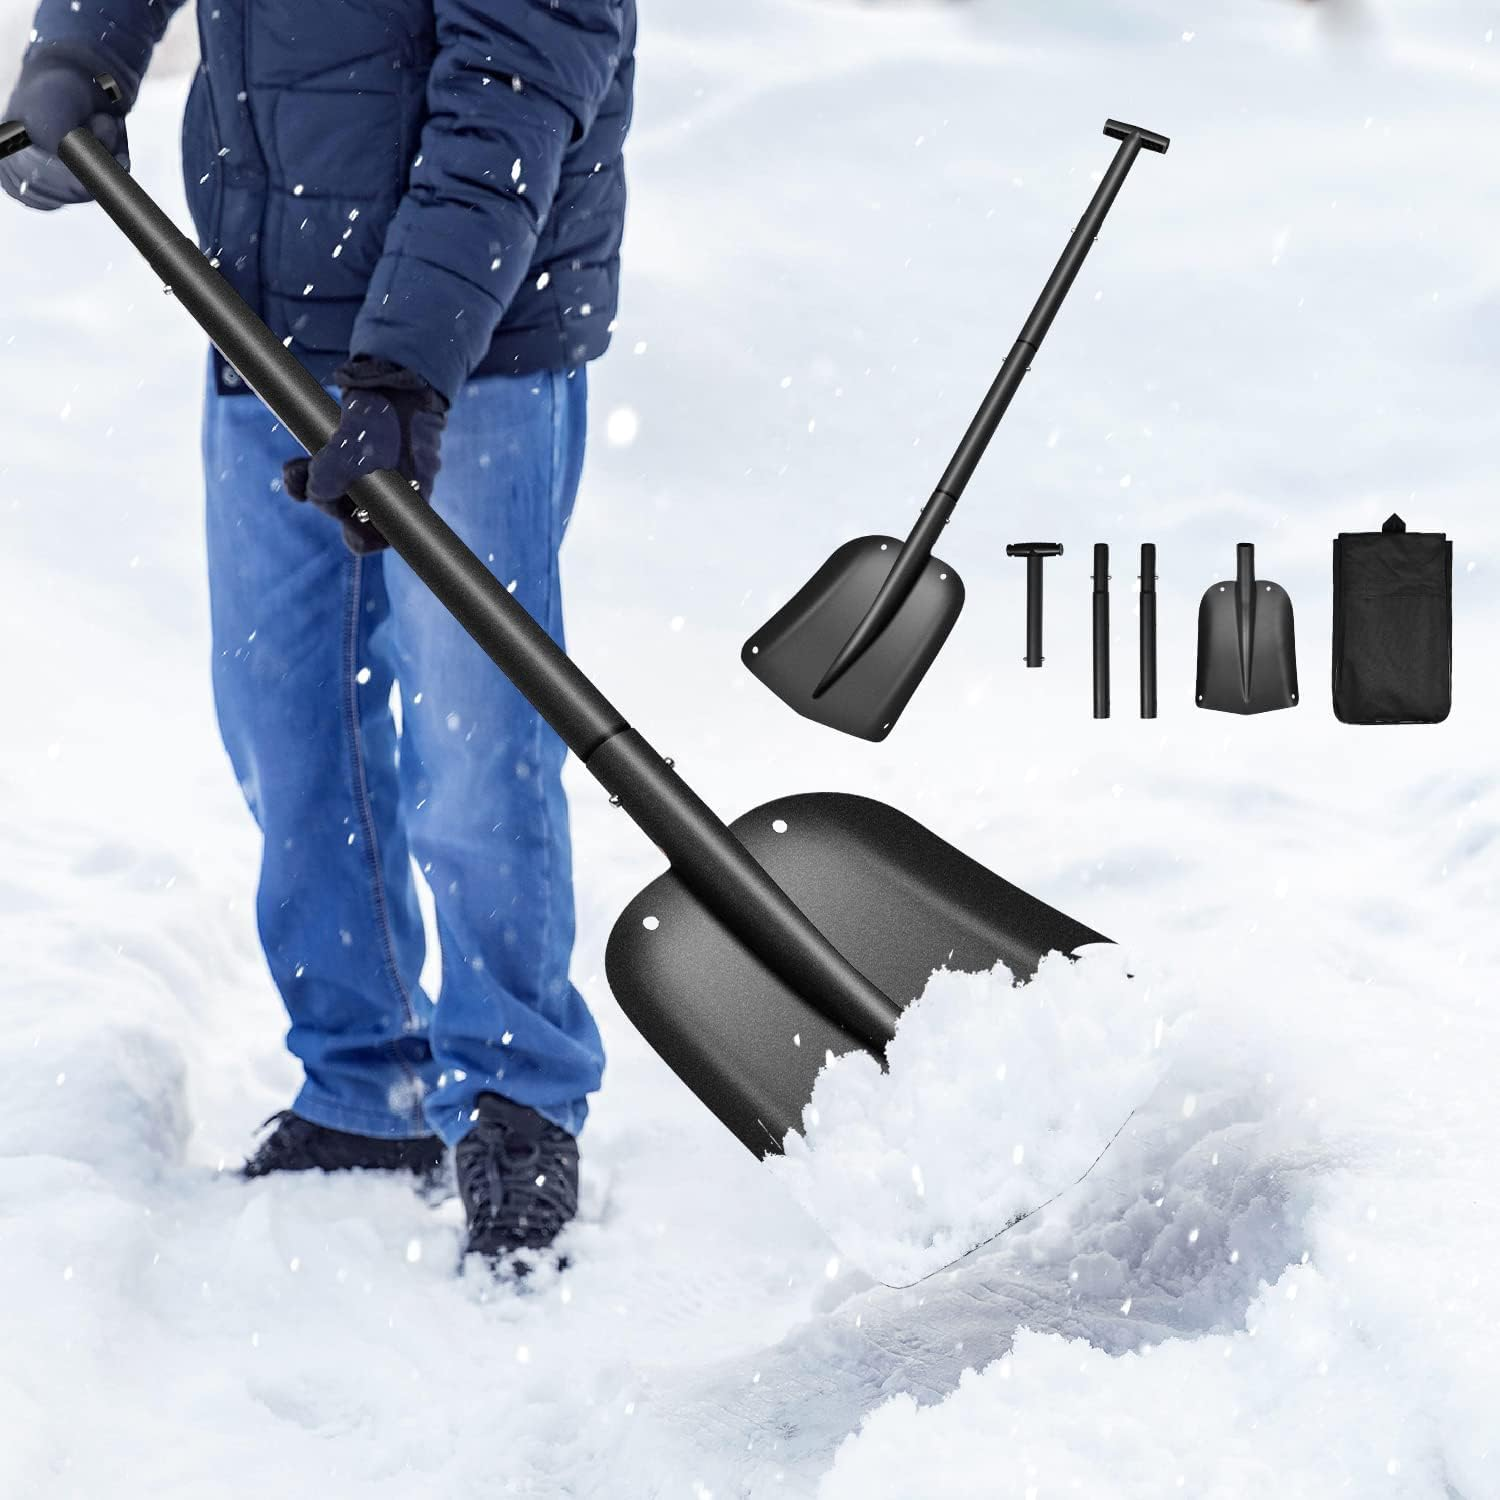 Lightweight snow shovels for quick snow removal